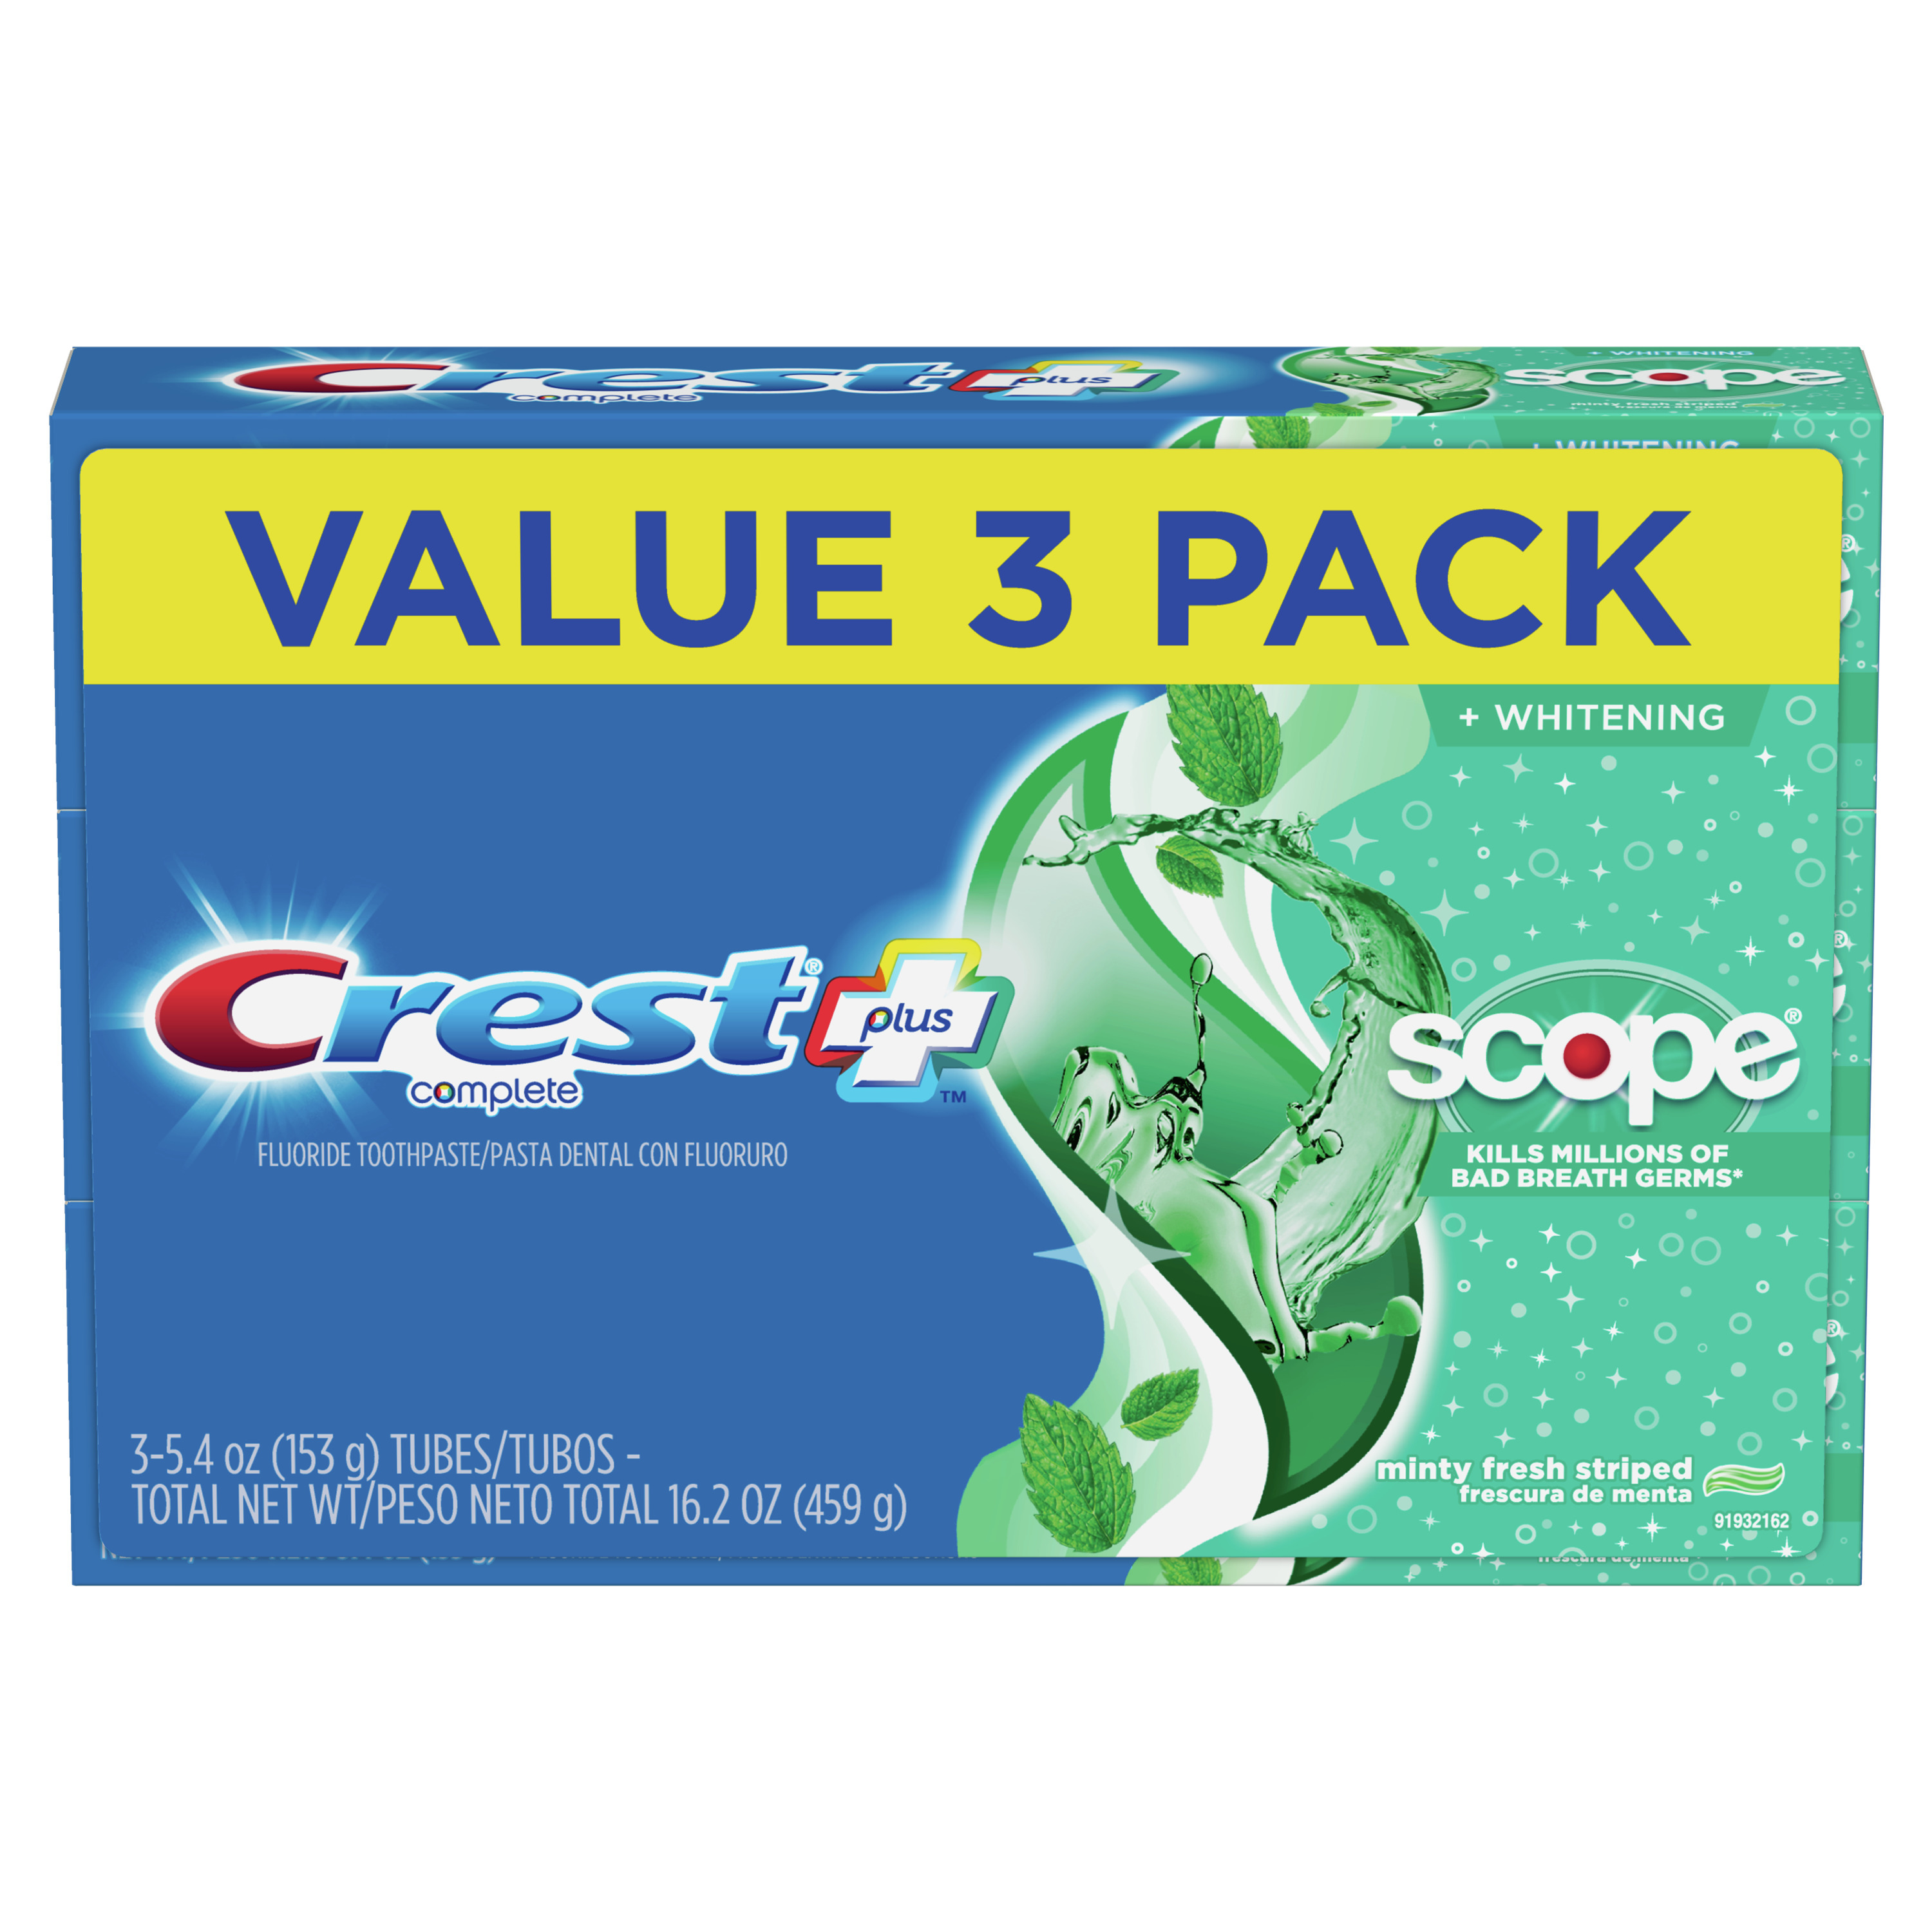 Crest + Scope Complete Whitening Toothpaste, Minty Fresh, 5.4 oz, Pack of 3 - image 1 of 9